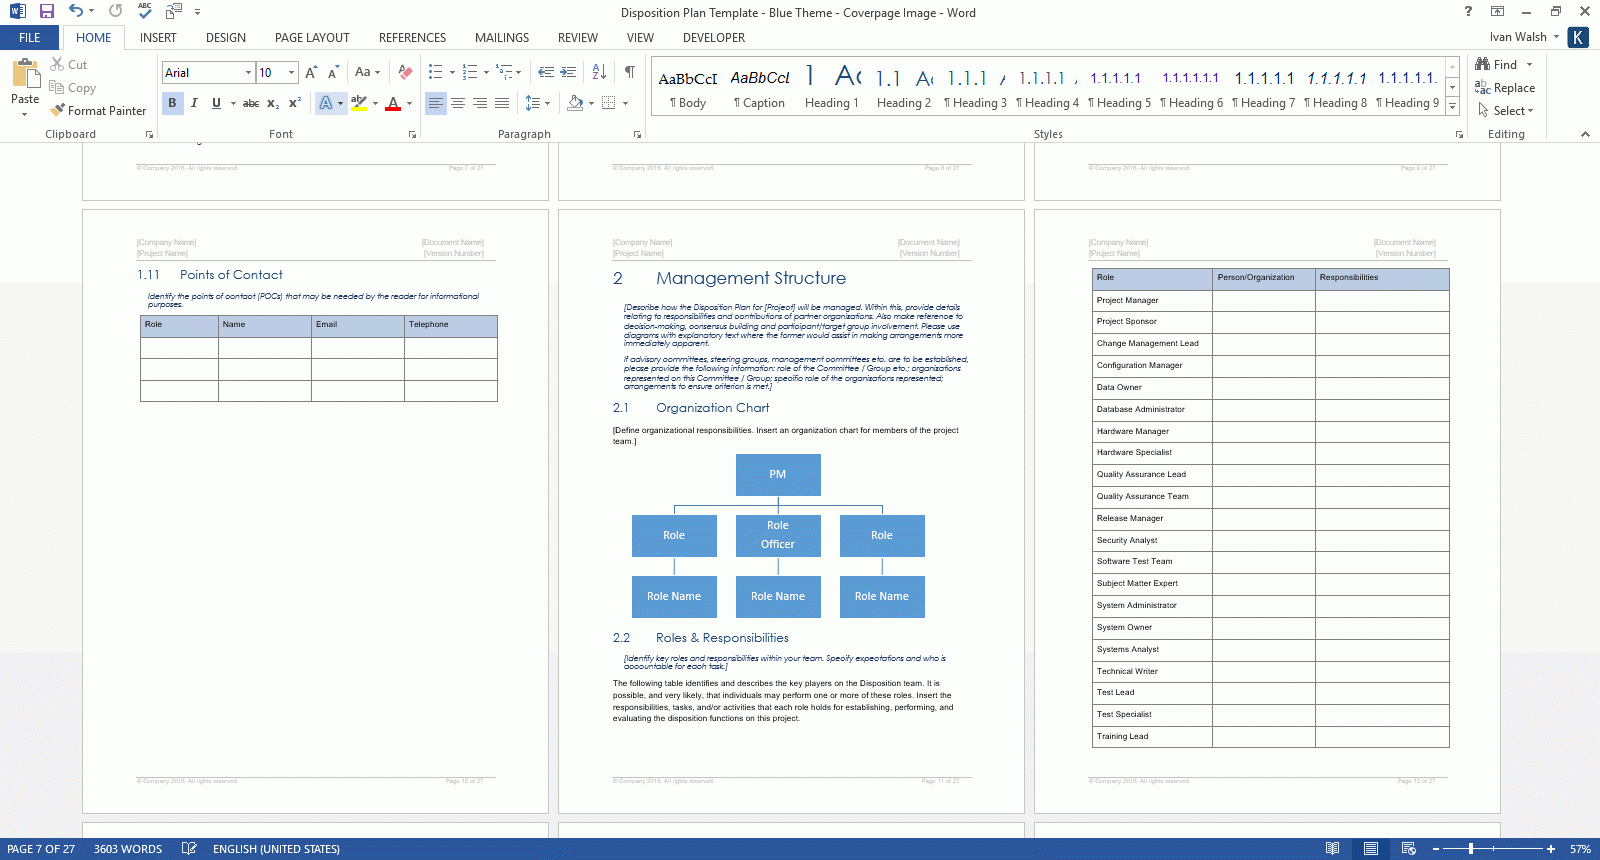 Disposition Plan Template (Ms Word) – Templates, Forms With Regard To Where Are Word Templates Stored